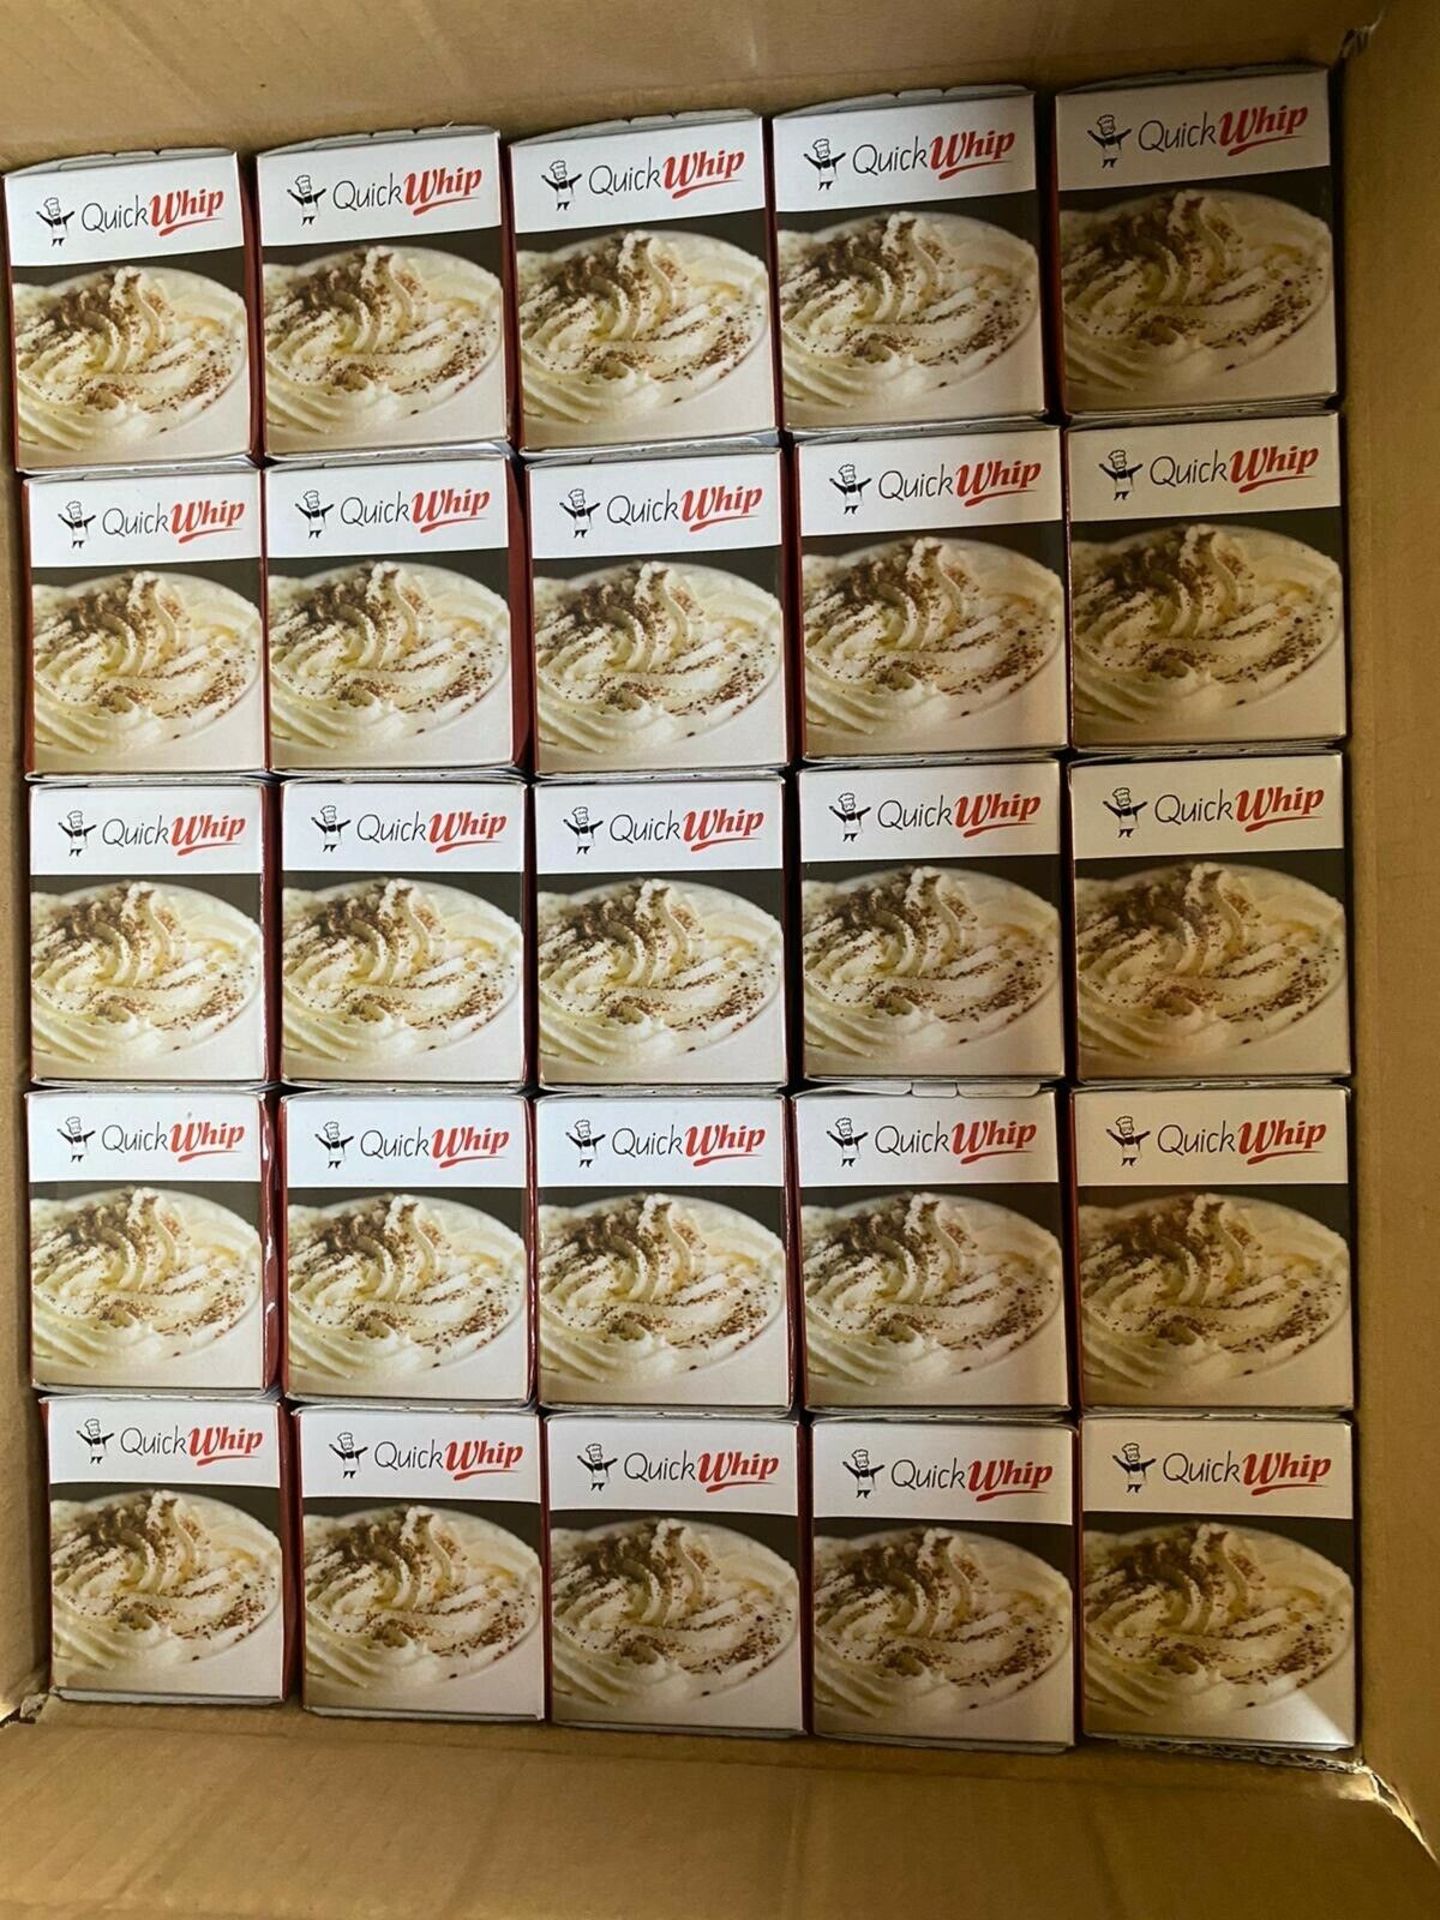 1 x Case of 600 x 8g Whipping Cream Chargers branded 'QuickWhip' - Image 2 of 2